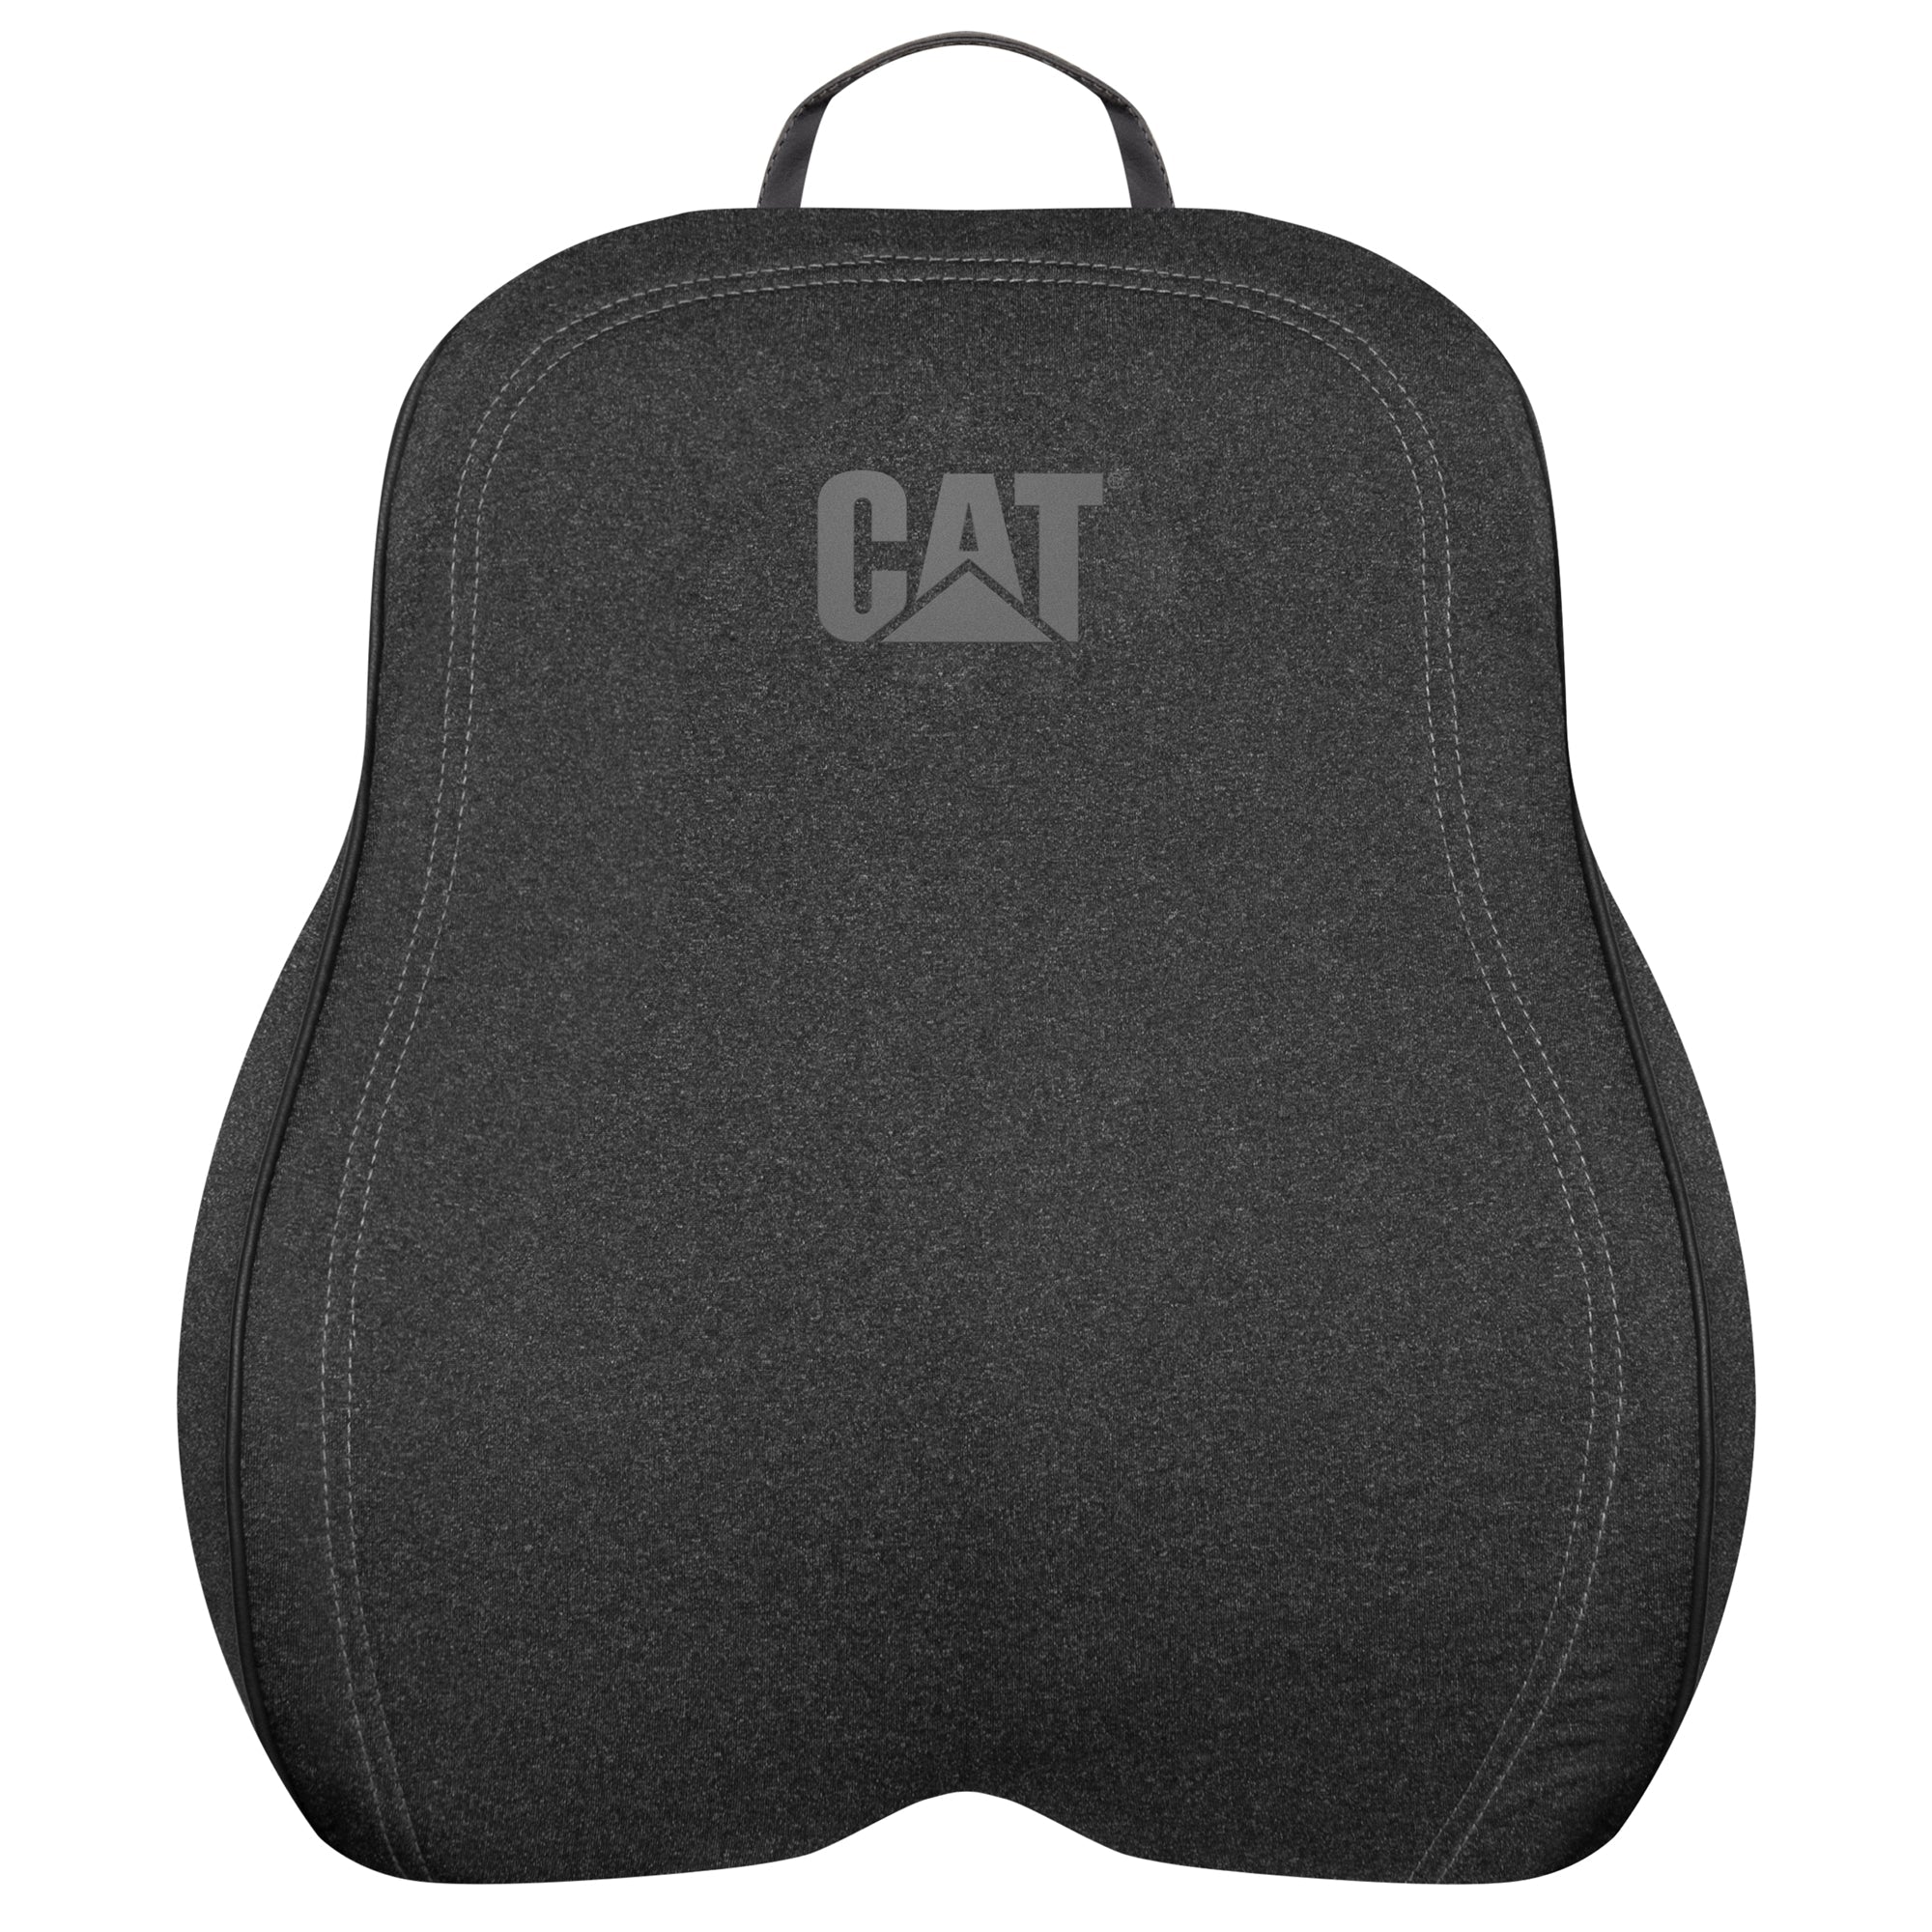 Cat® Big Lumbar Support Cushion for Cars Trucks SUVs - Ergonomic Back Support for Comfortable Driving - Gray